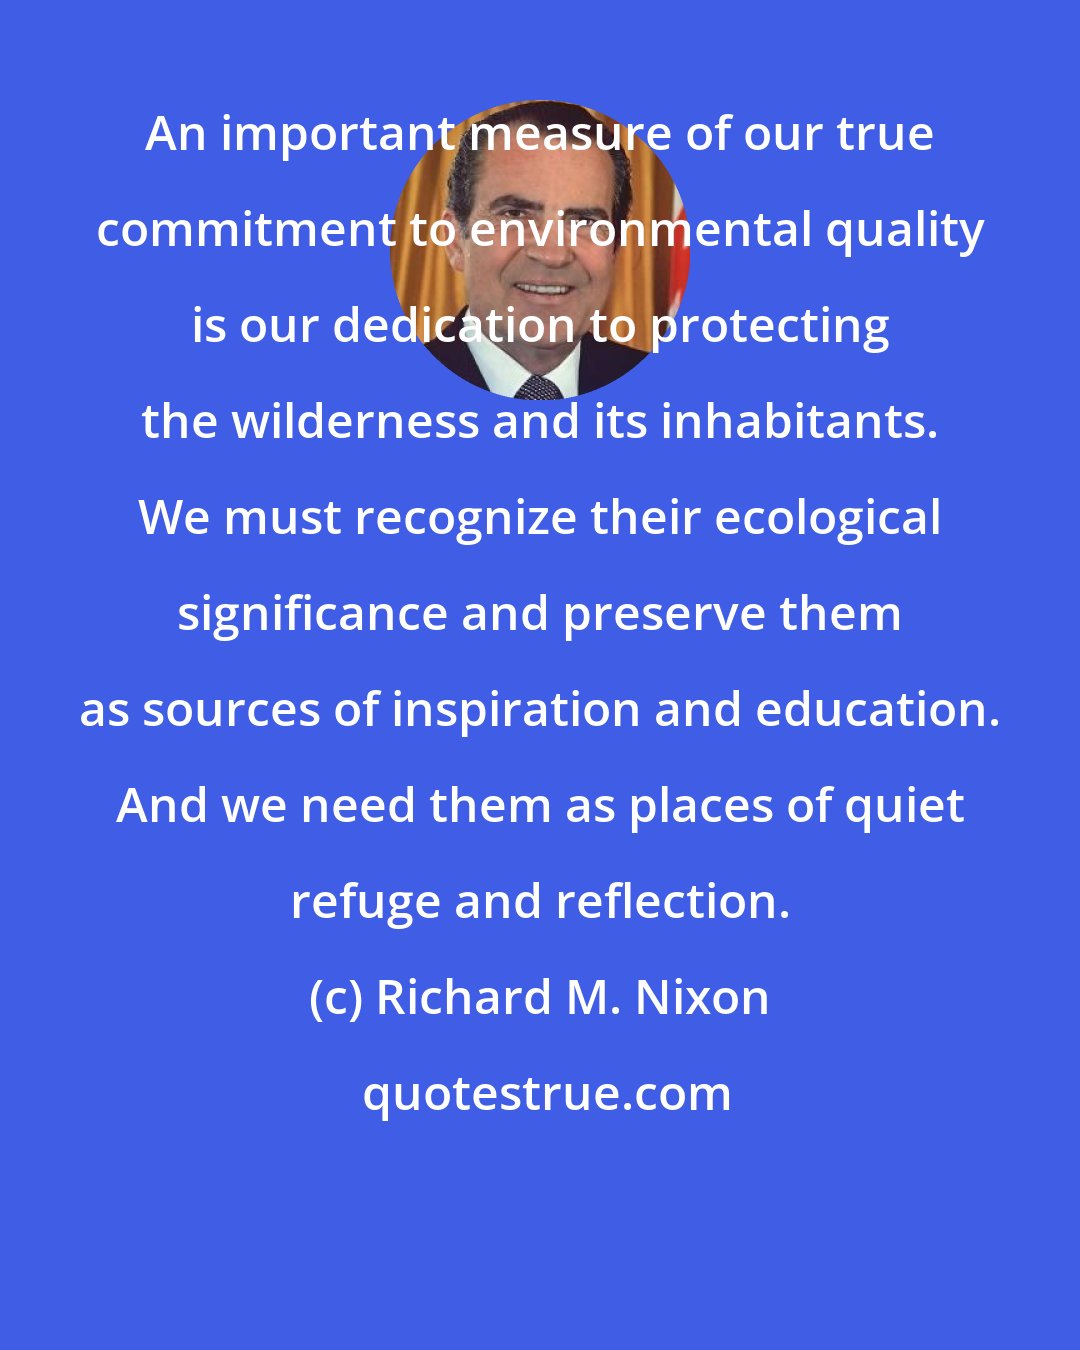 Richard M. Nixon: An important measure of our true commitment to environmental quality is our dedication to protecting the wilderness and its inhabitants. We must recognize their ecological significance and preserve them as sources of inspiration and education. And we need them as places of quiet refuge and reflection.